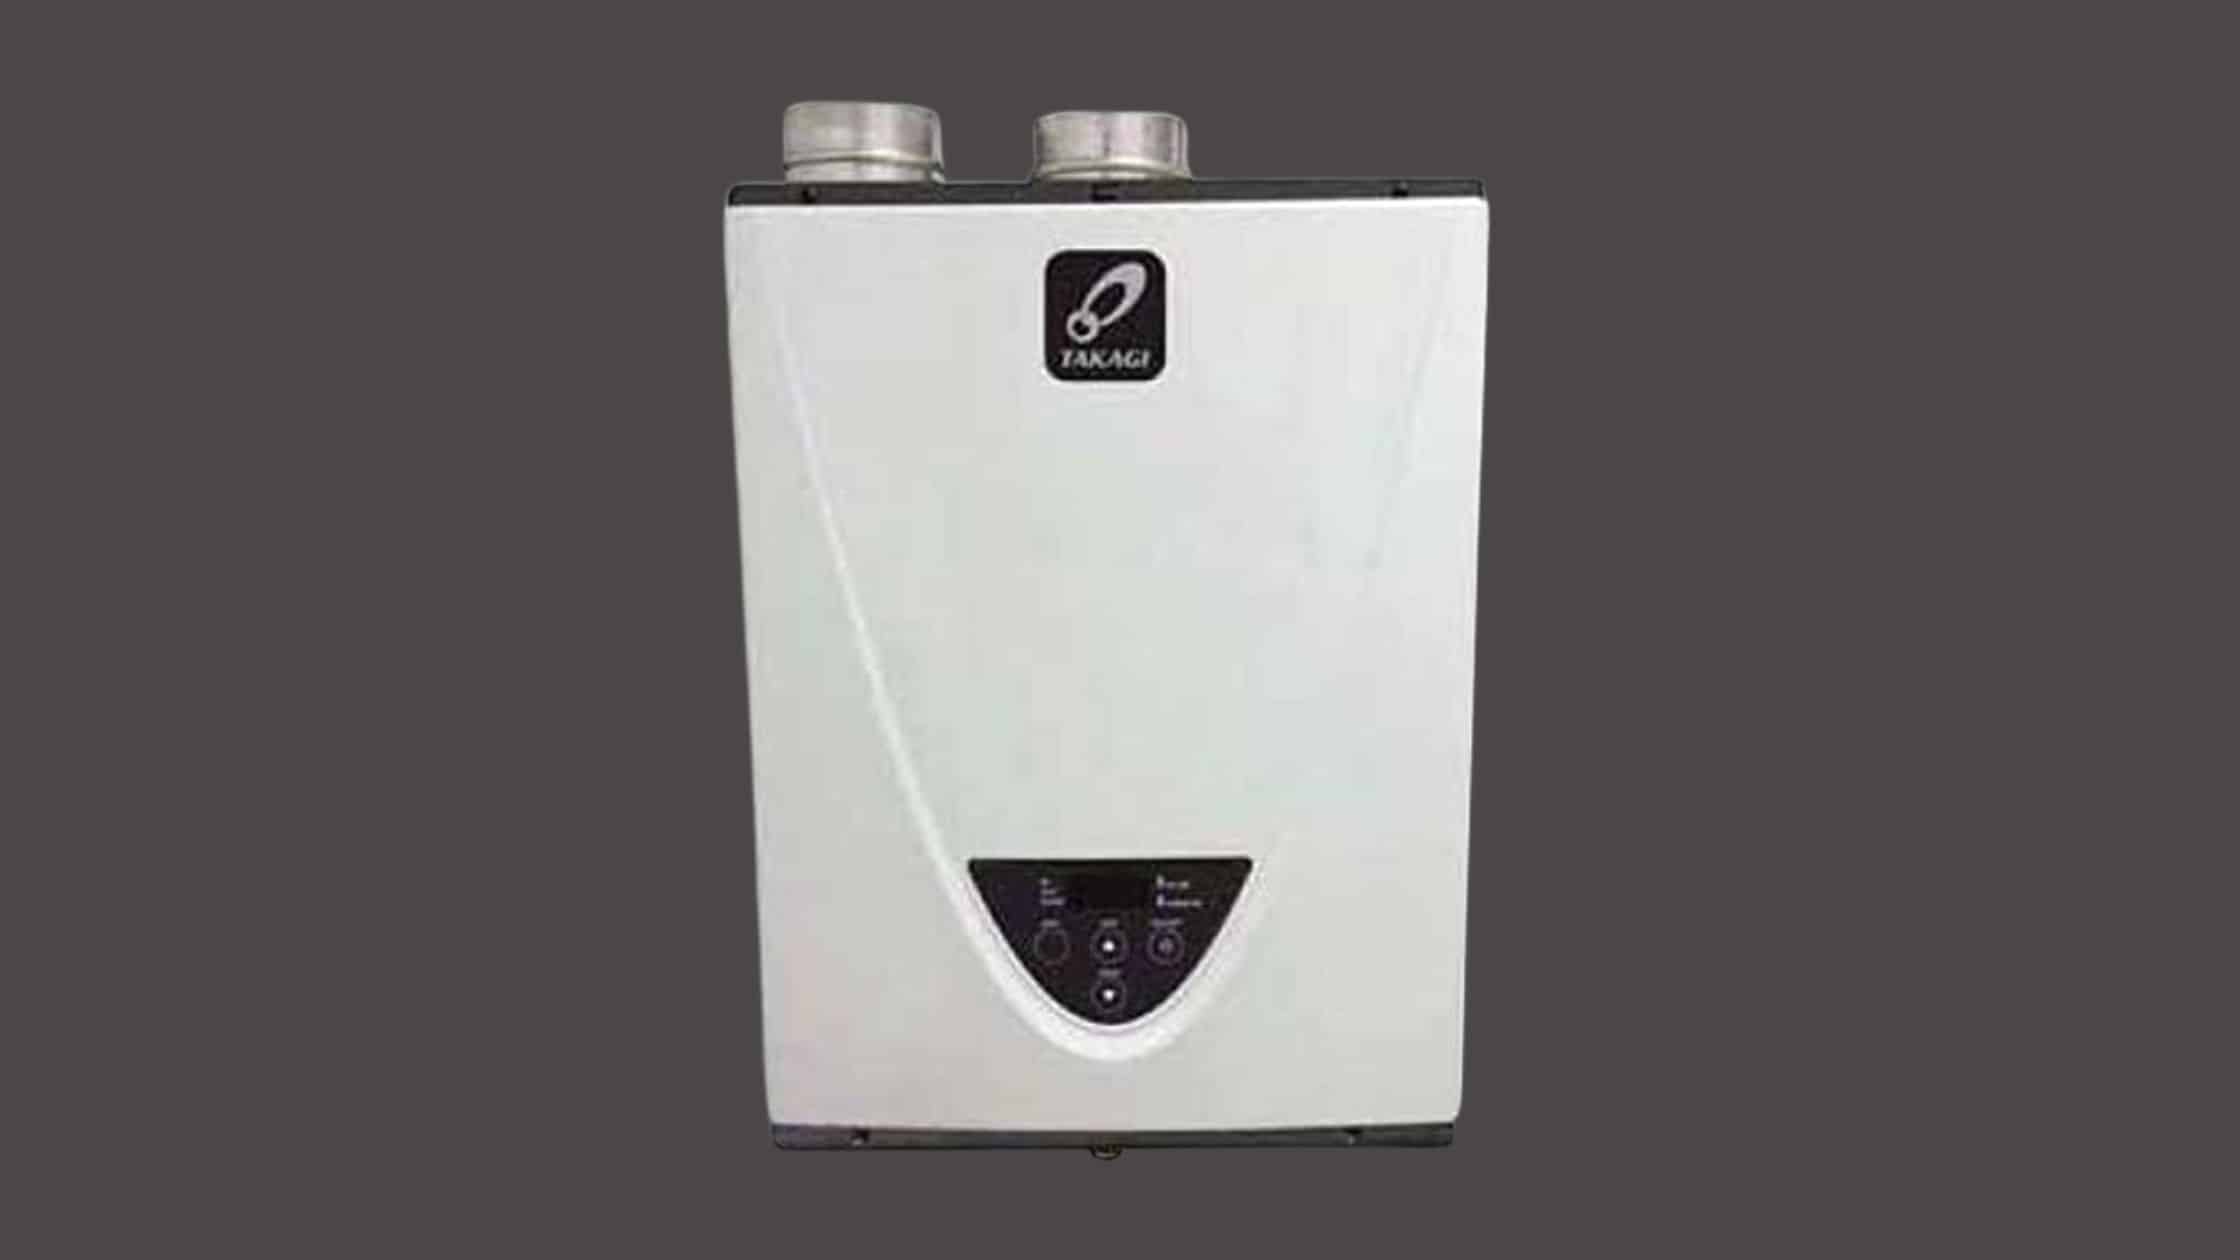 Condensing Tankless water heater